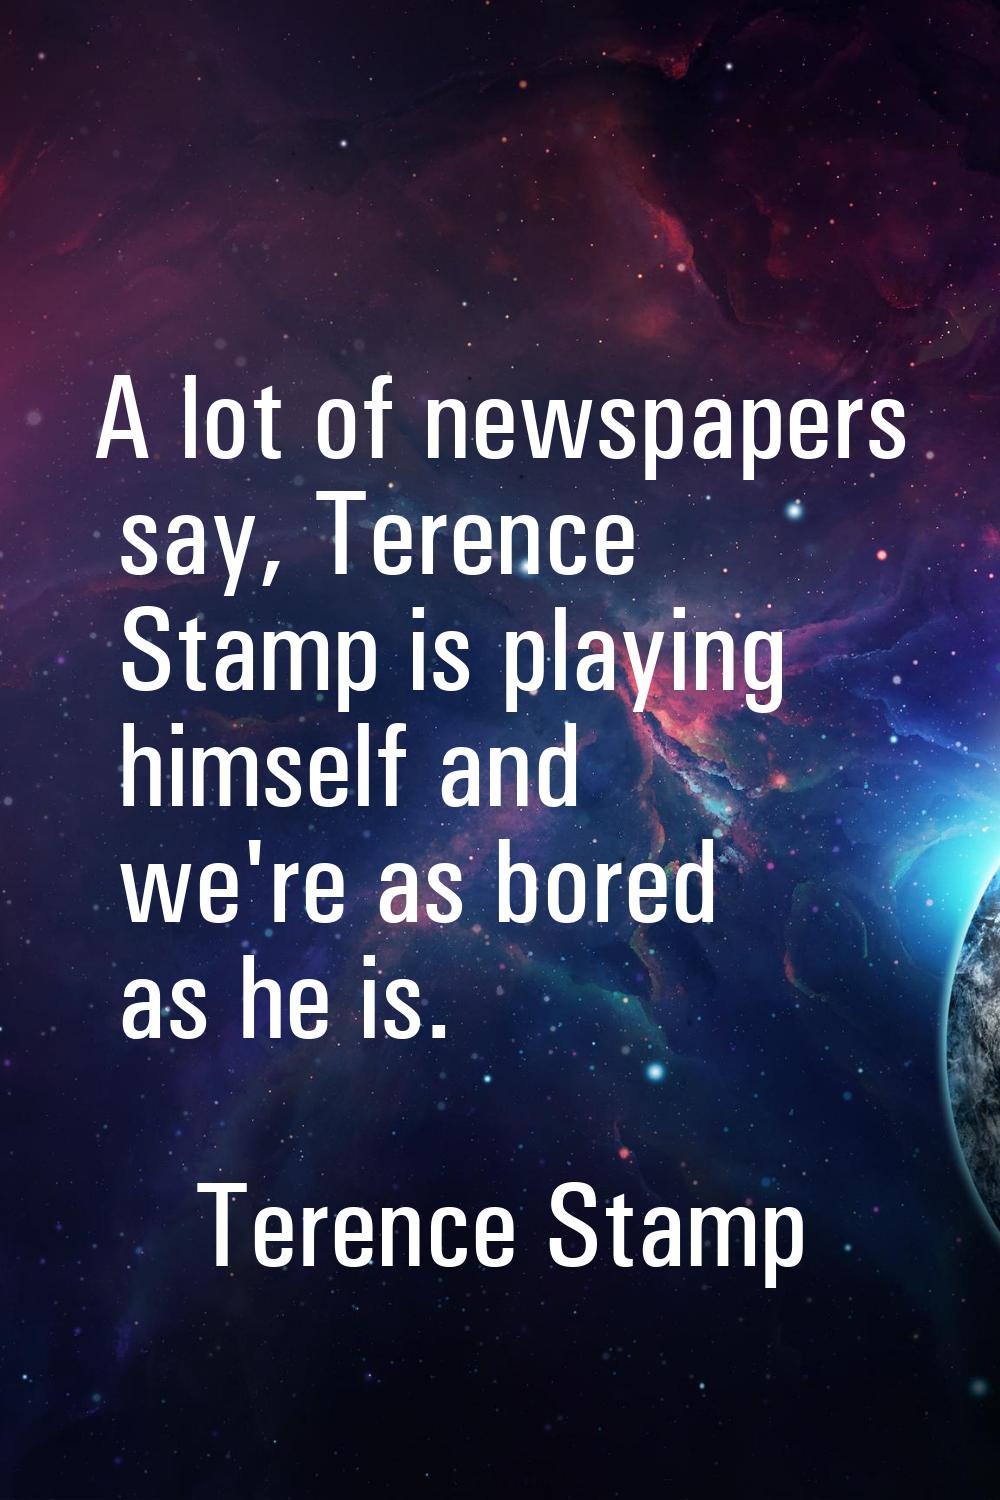 A lot of newspapers say, Terence Stamp is playing himself and we're as bored as he is.